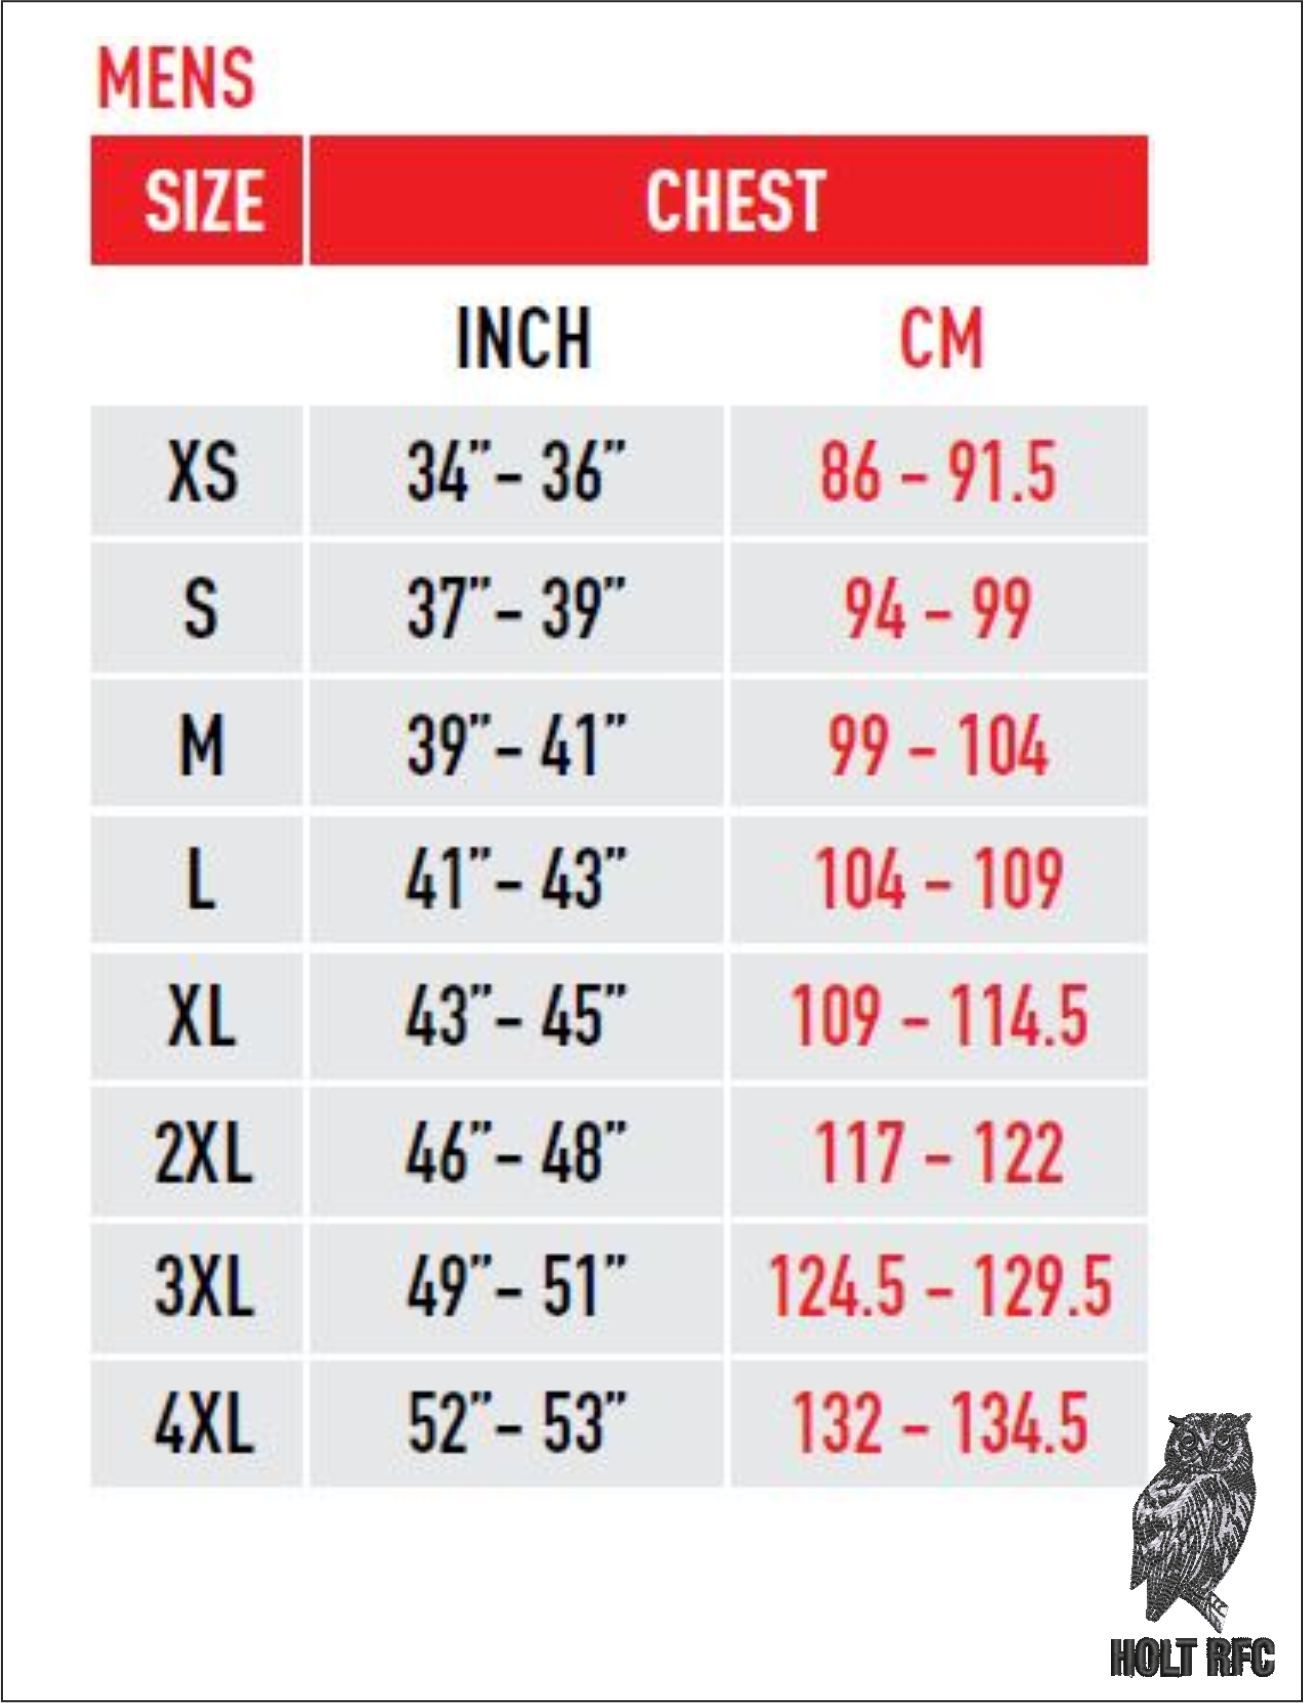 Mens Top Size Guide